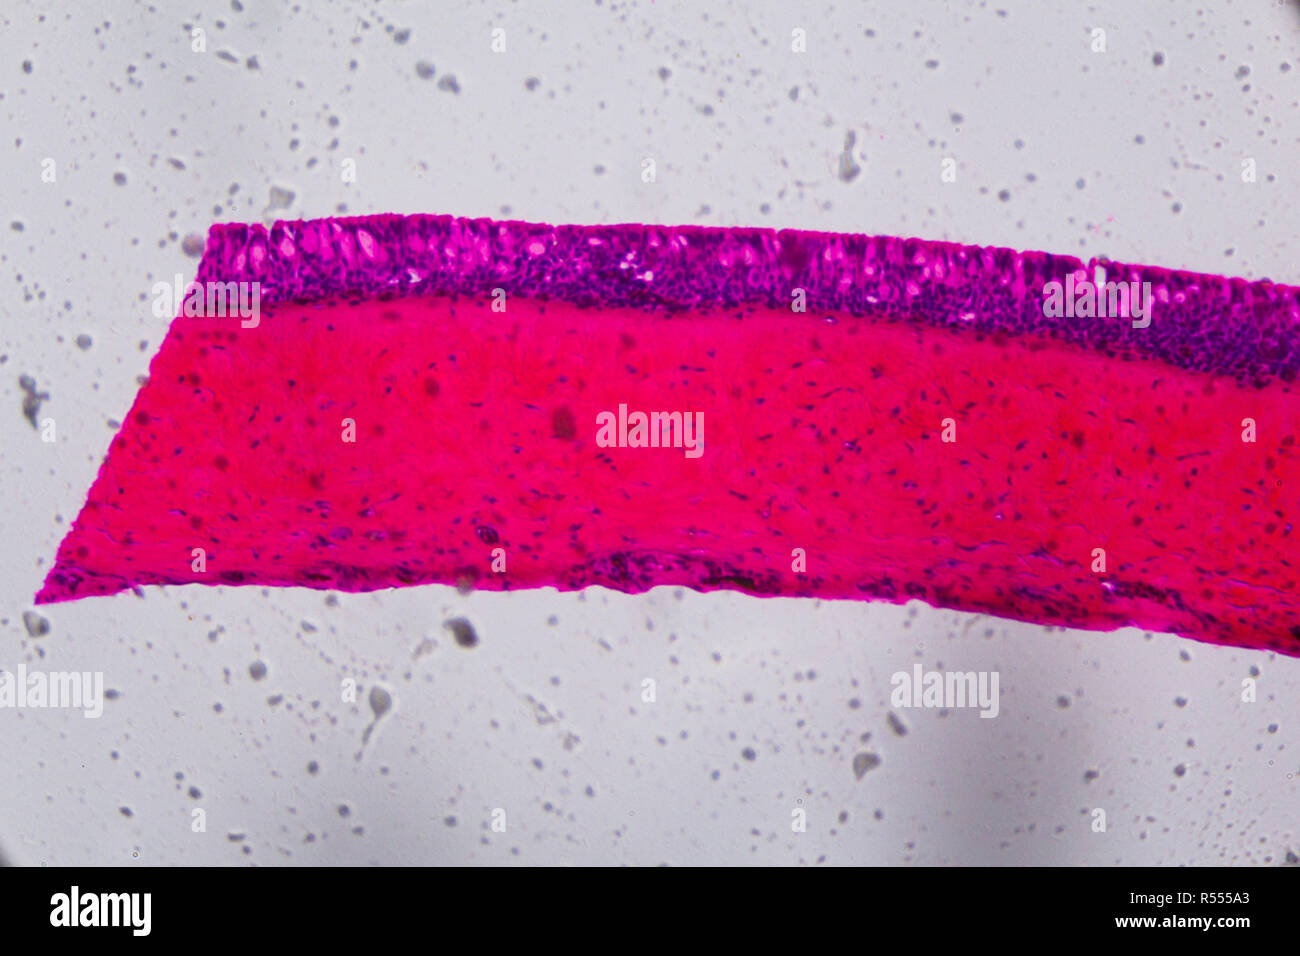 Anodonta gills ciliated epithelium under the microscope - Abstract pink and purple color on white background Stock Photo